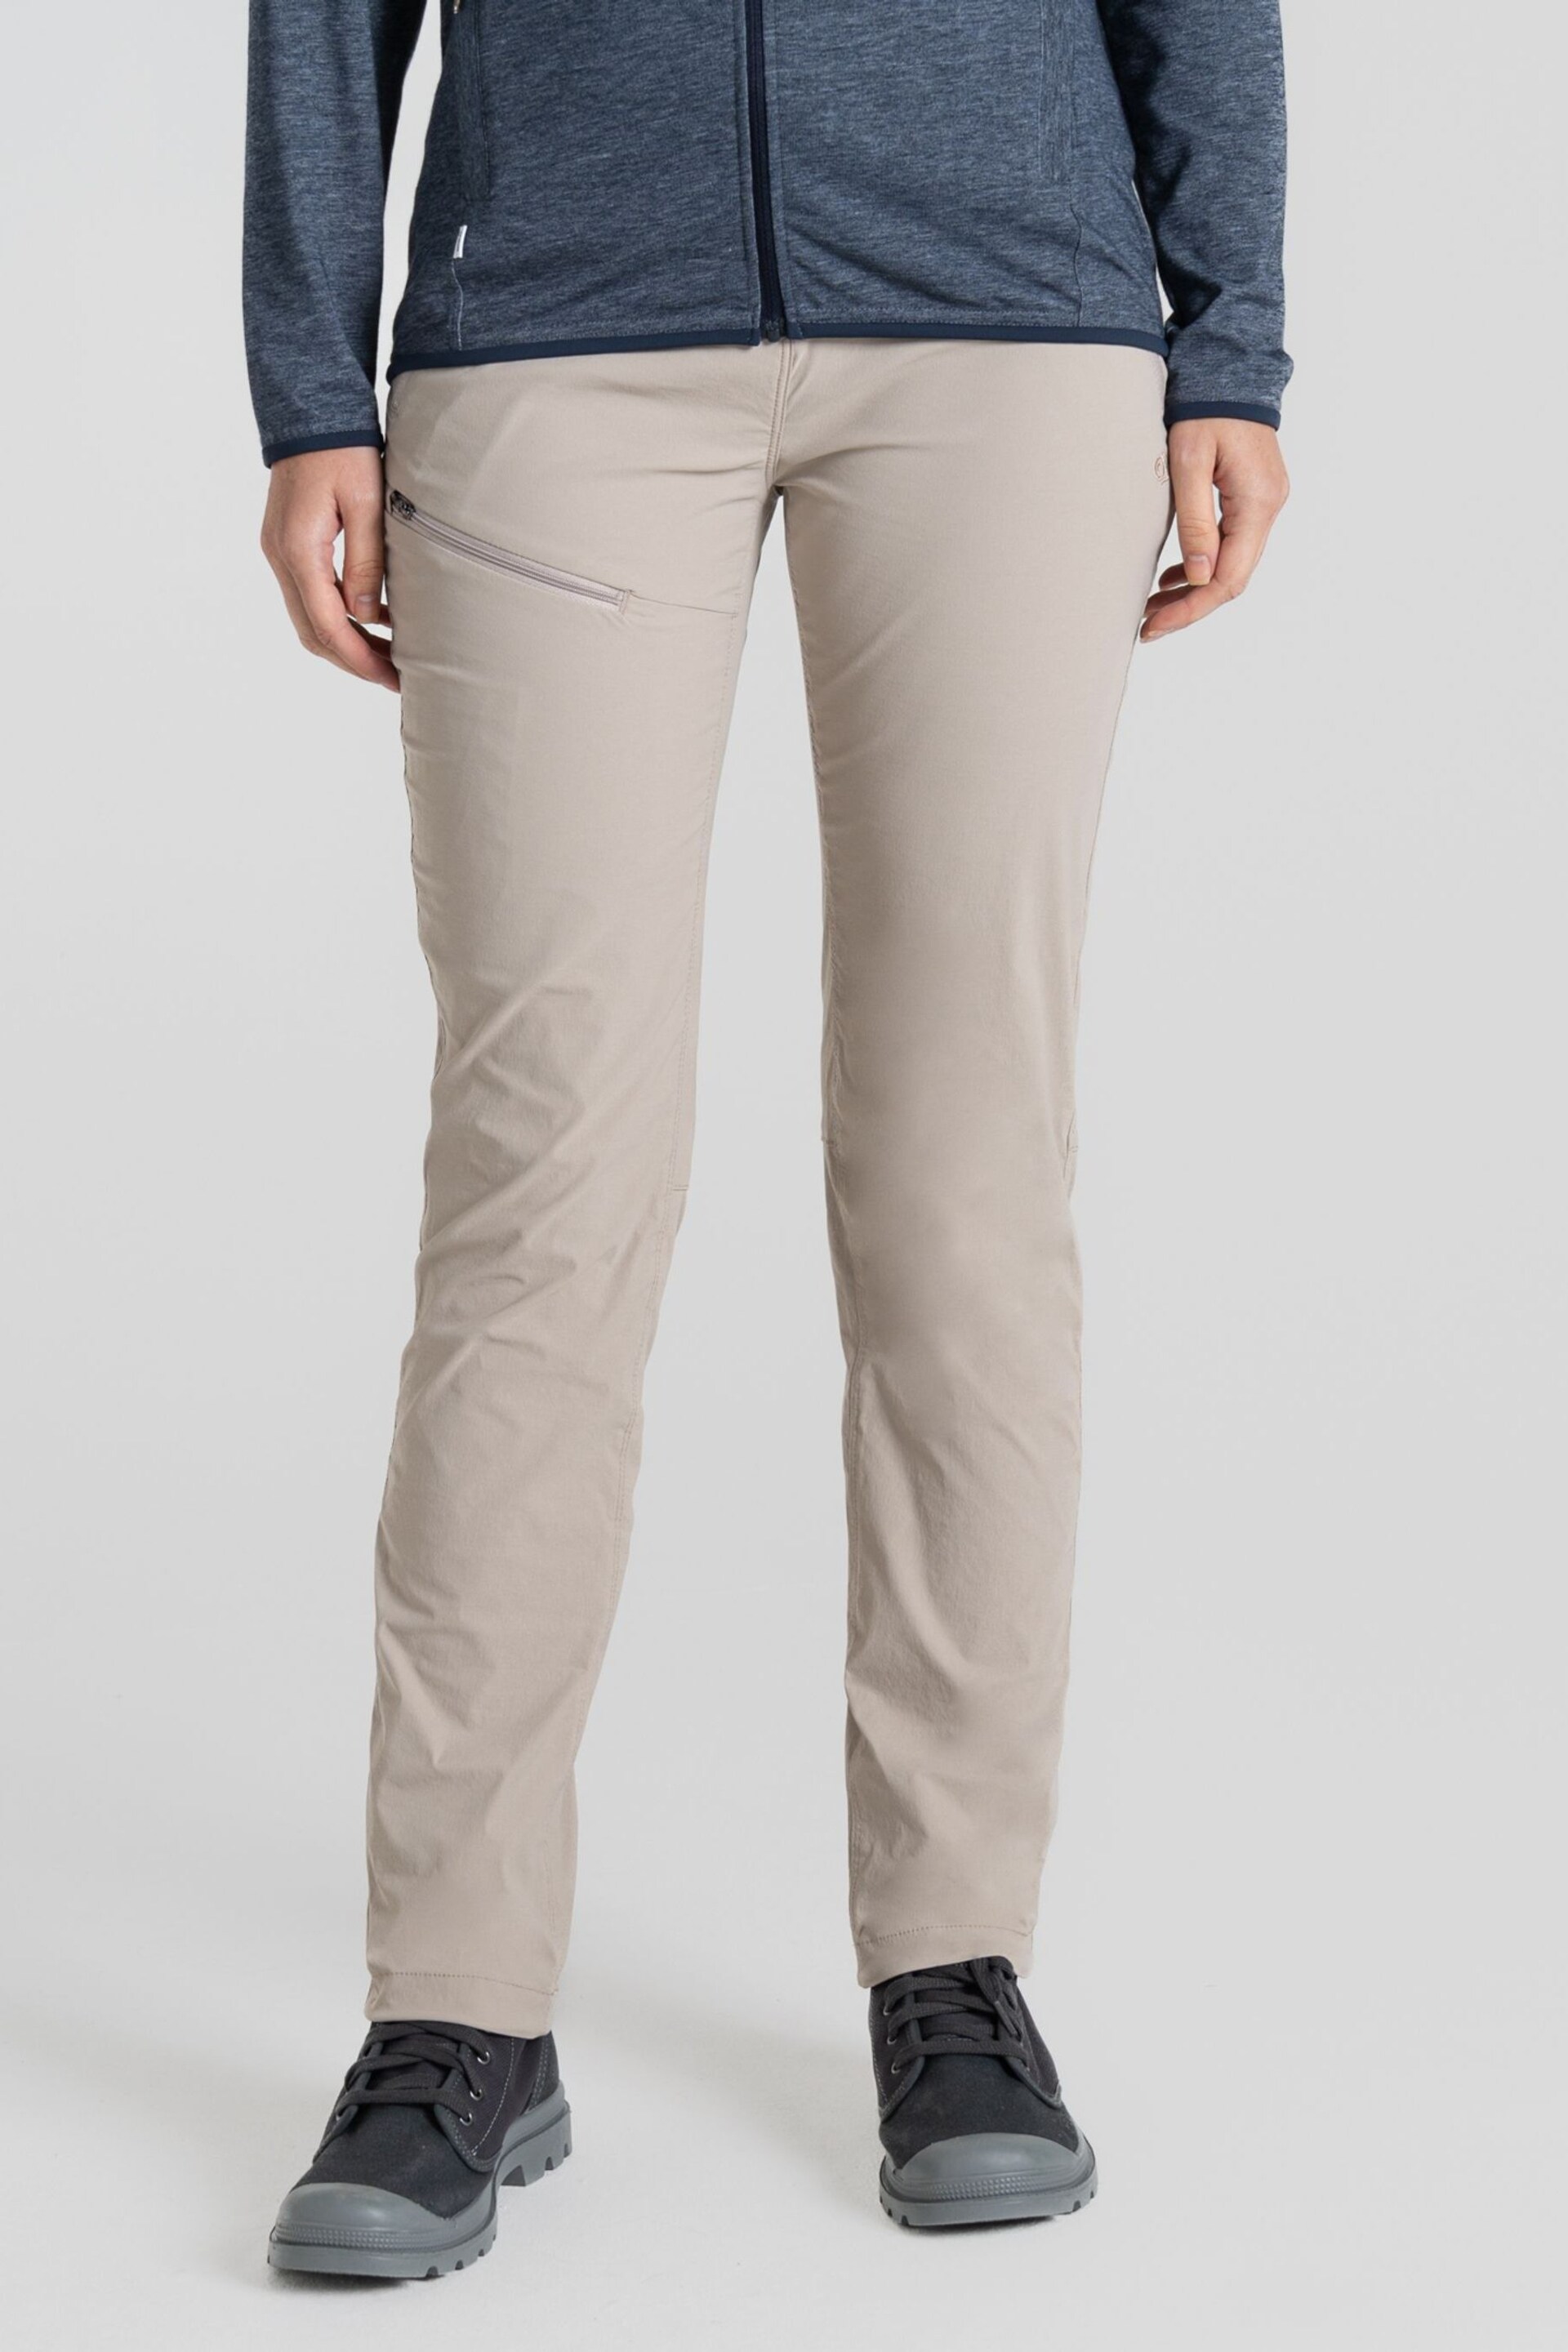 Craghoppers PRO III Brown Trousers - Image 1 of 7